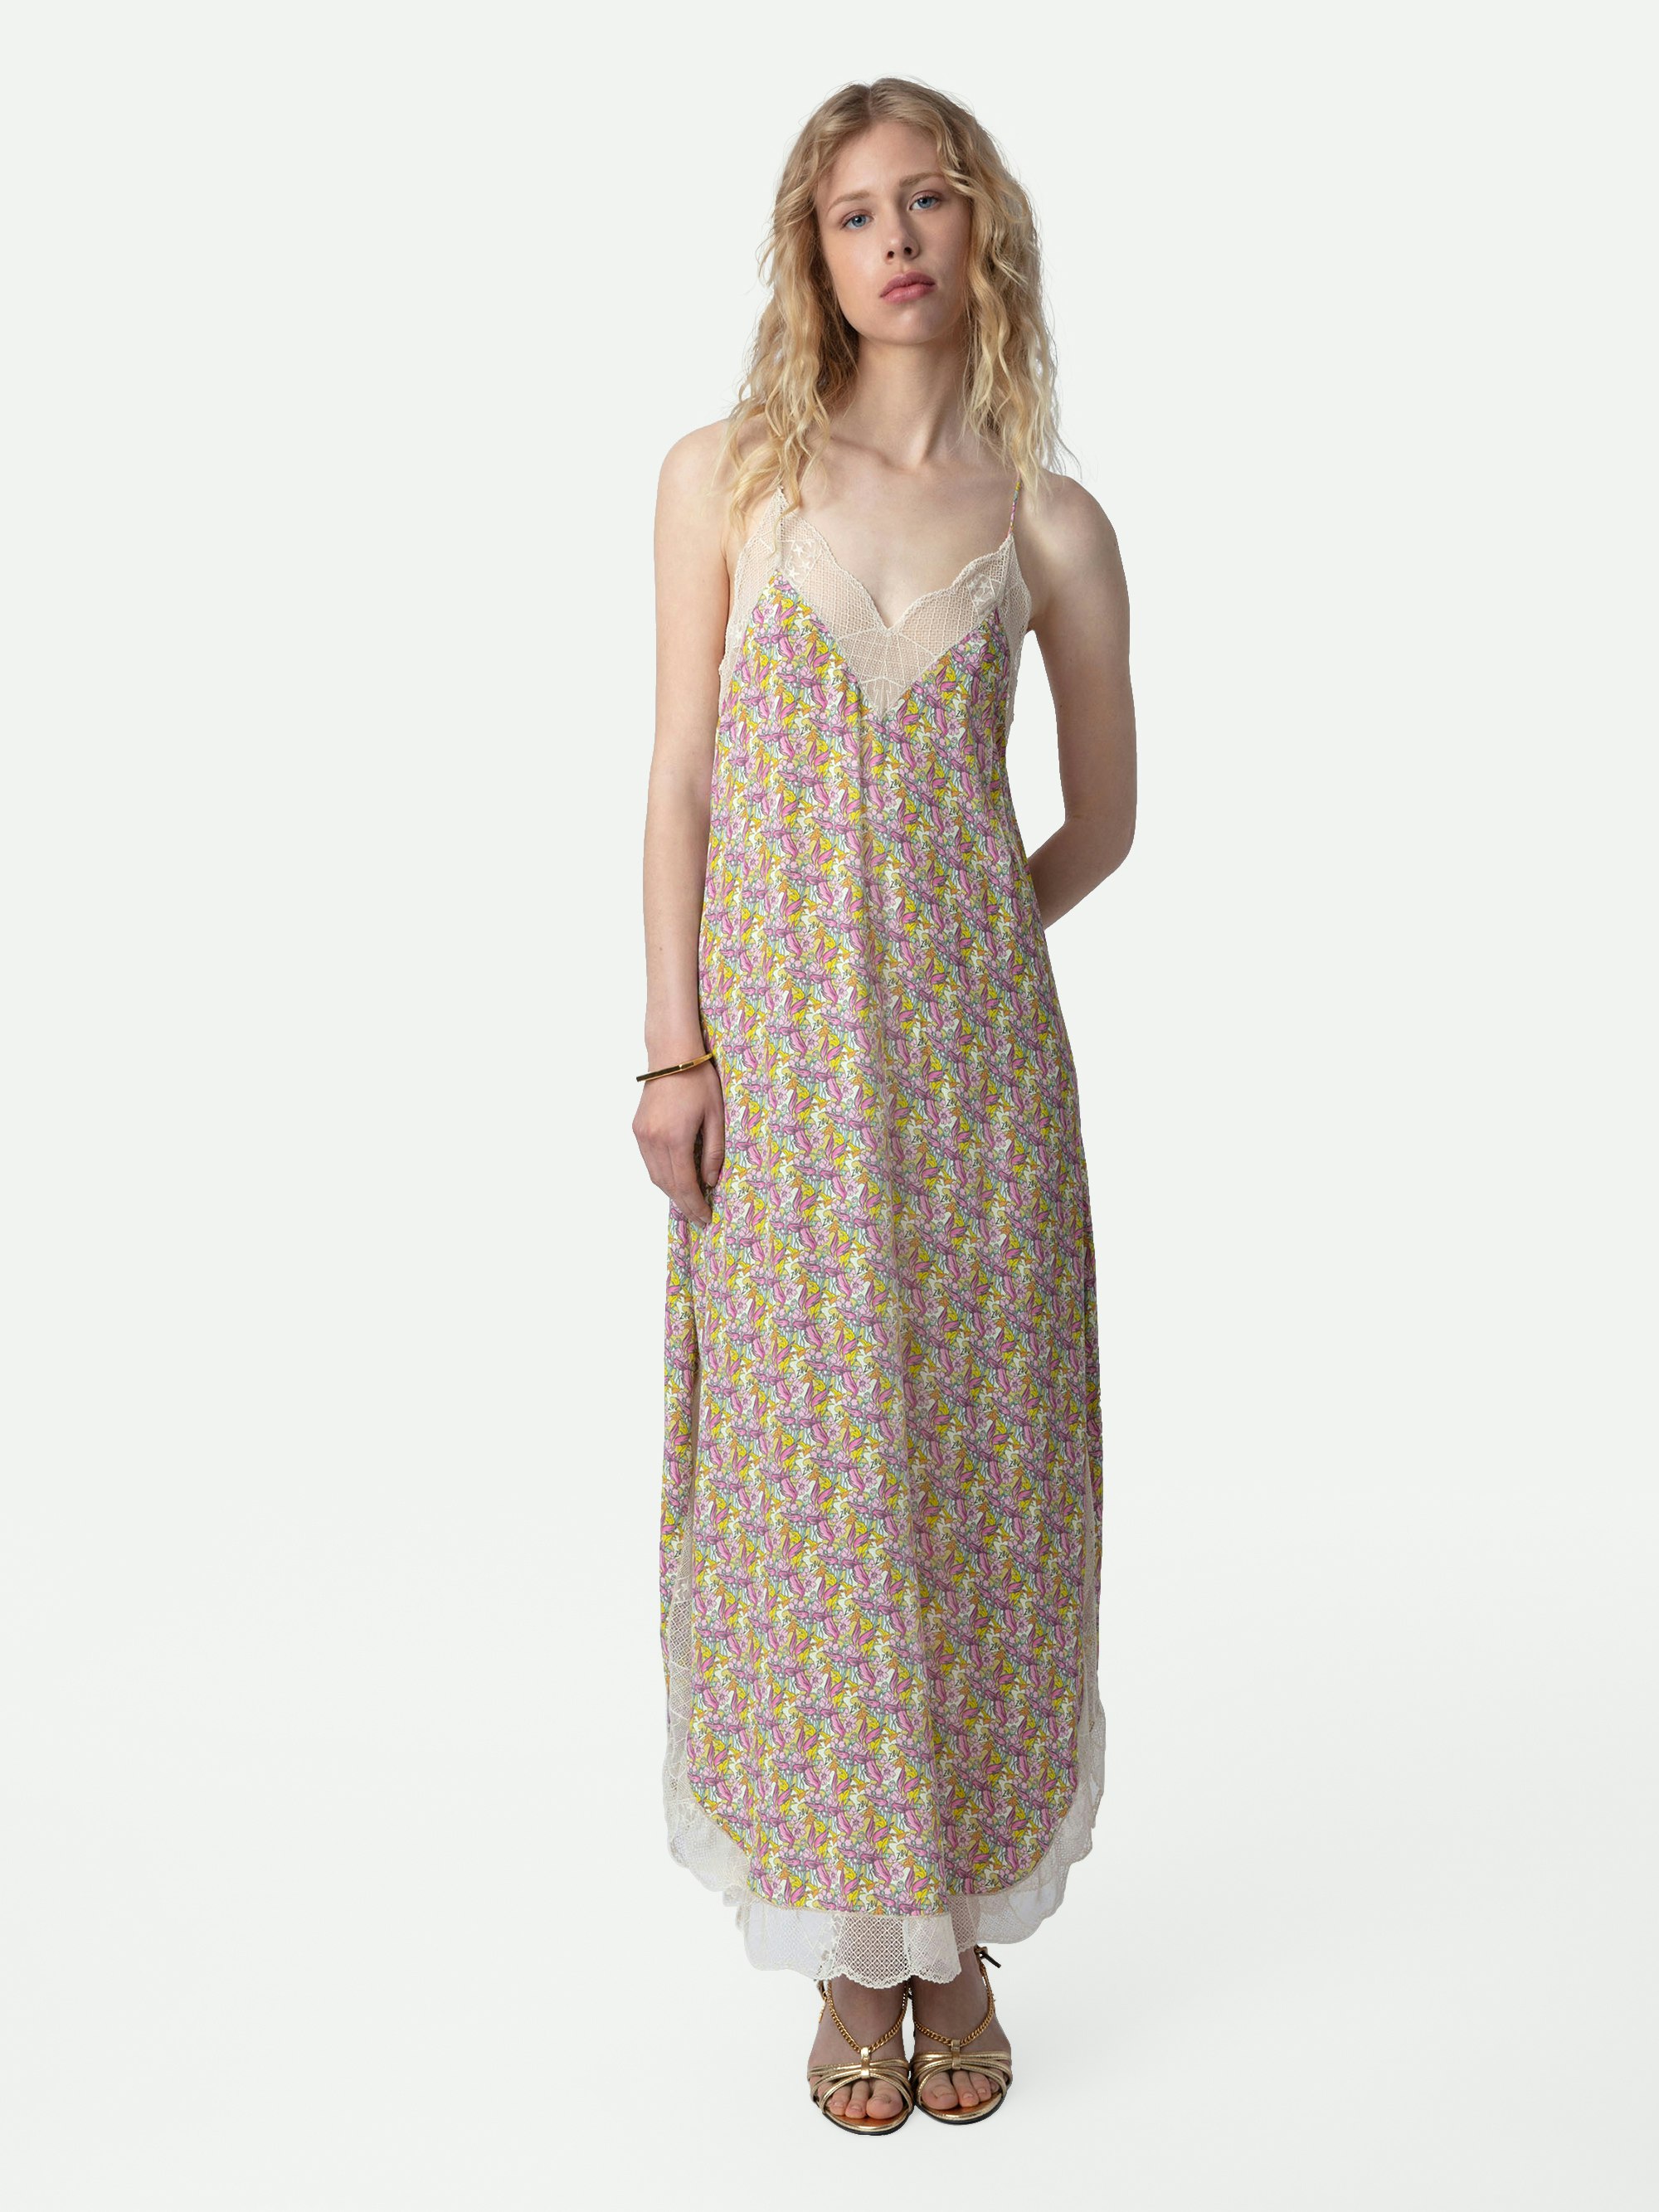 Ristyl Dress - Women's long yellow crepe dress featuring liberty print and wings.